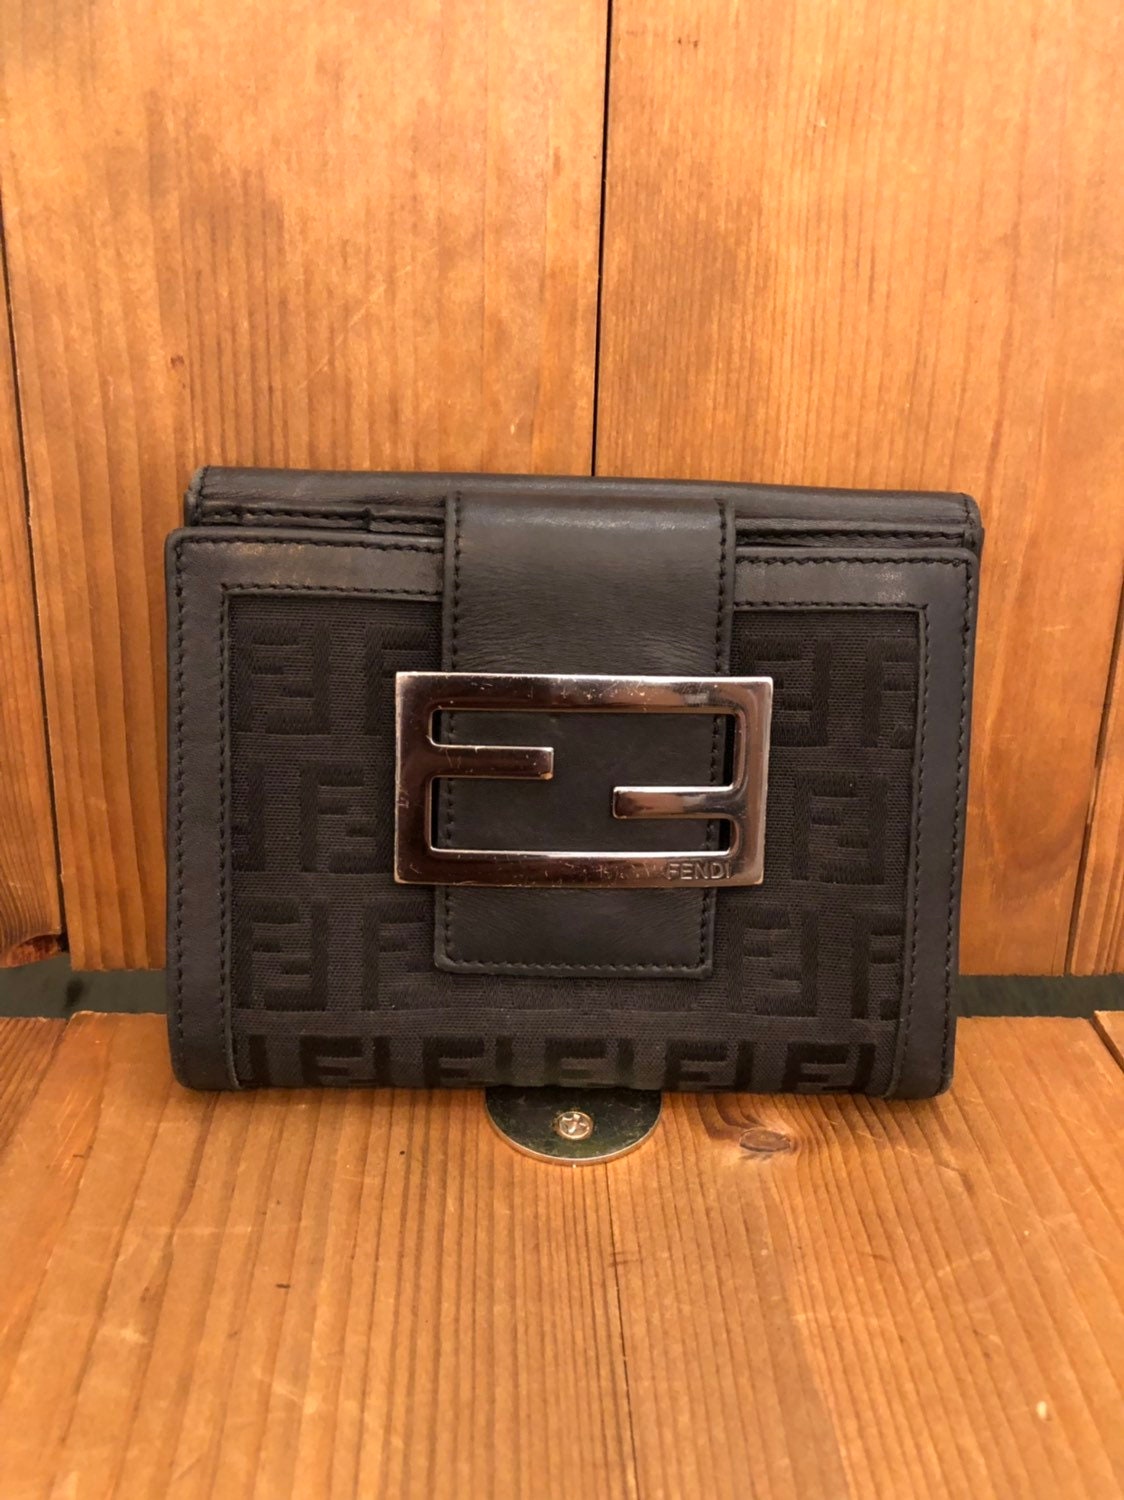 FENDI #40011 F Zucca Brown-Red Leather Continental Wallet – ALL YOUR BLISS